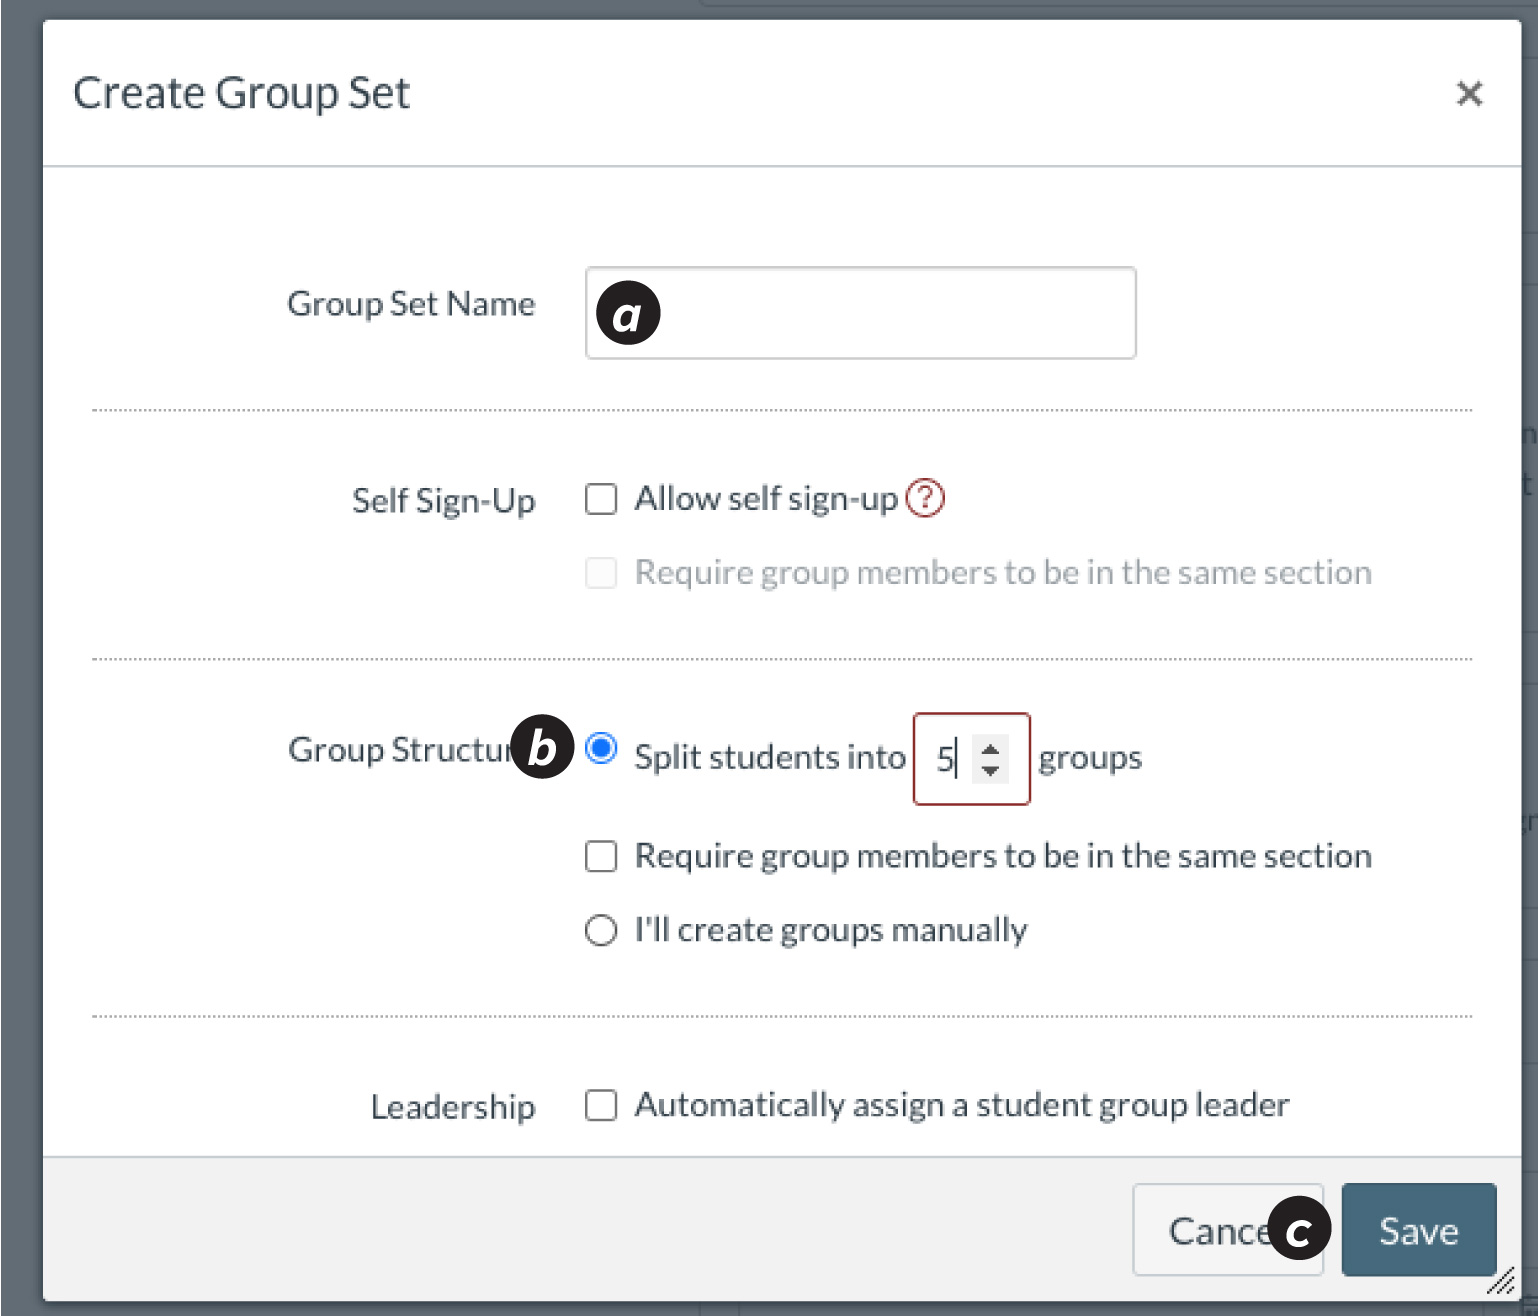 how to create a group assignment in canvas